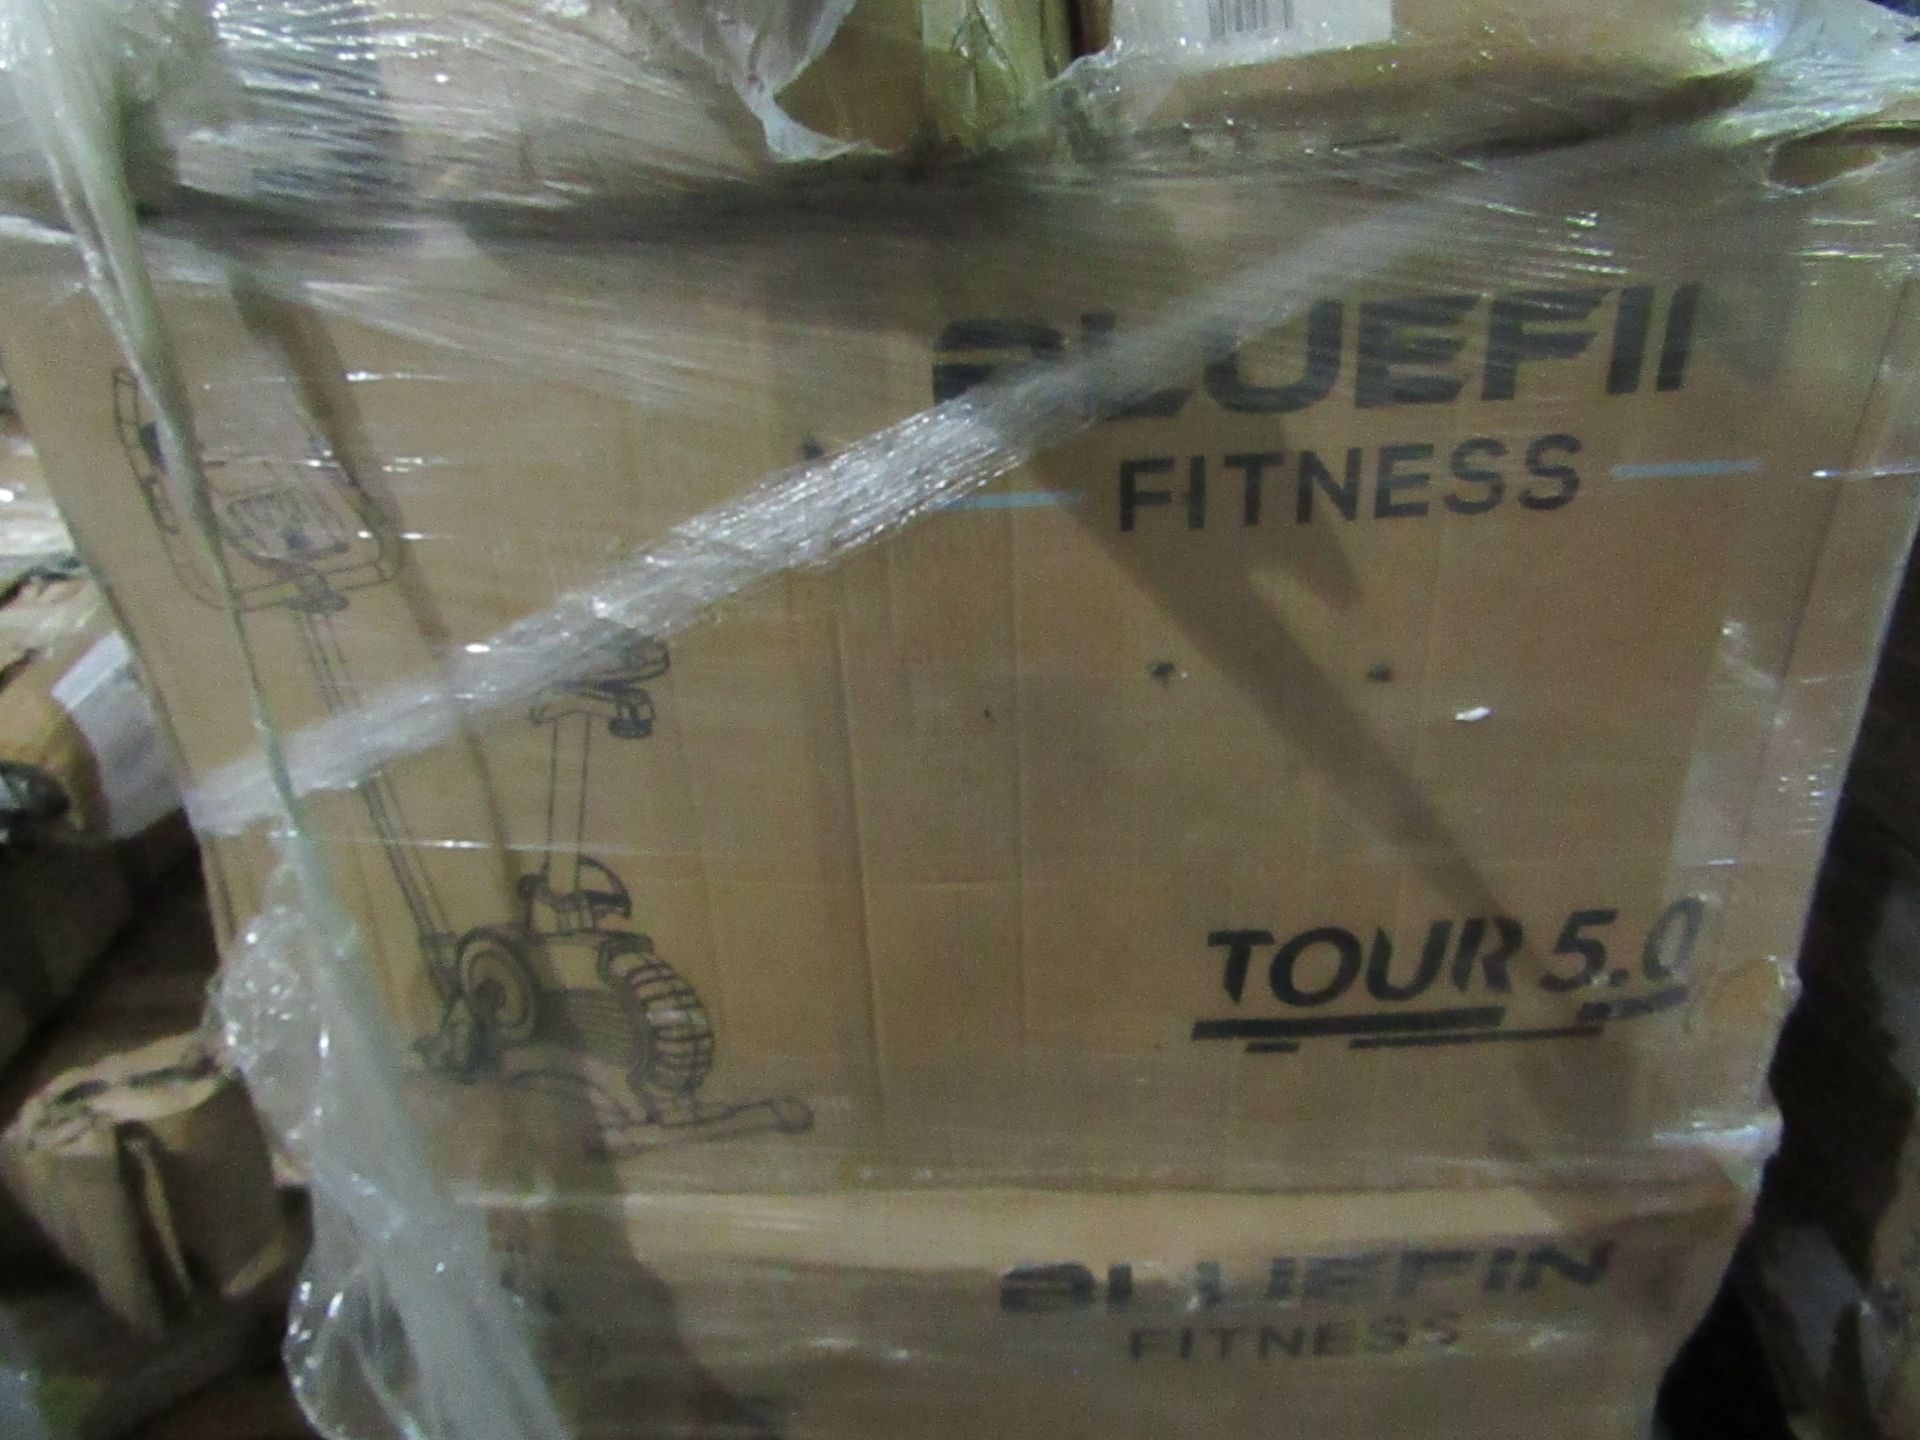 Bluefin Fitness Tour 5.0 Resistance Exercise Bike RRP ô?349.00 Our magnetic resistance exercise bike - Image 2 of 2